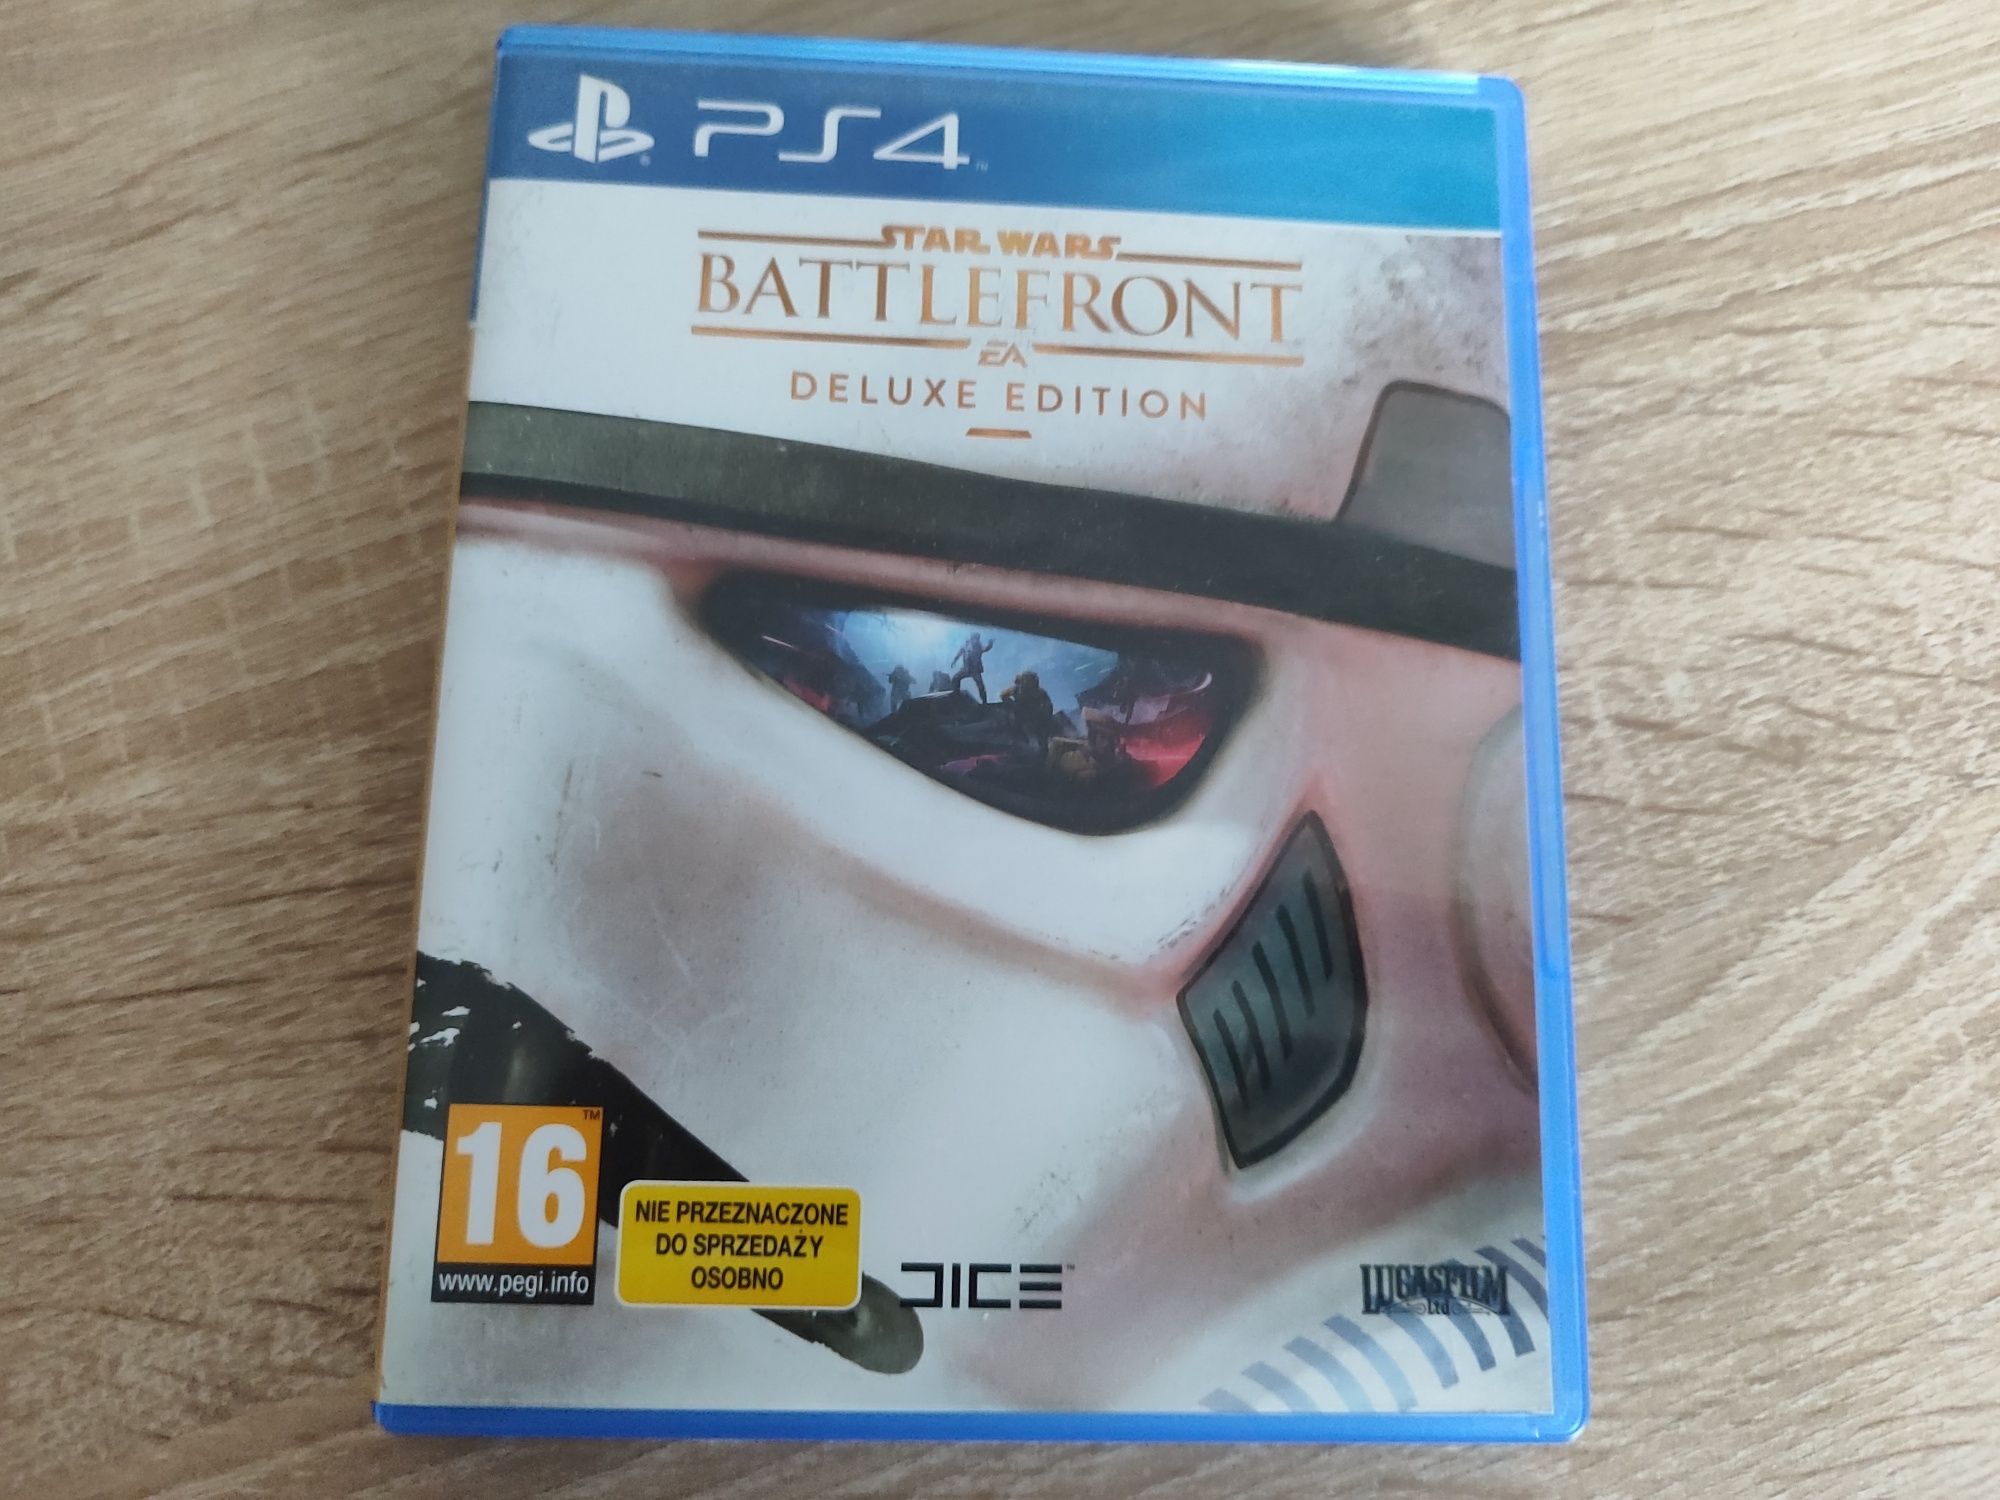 PS4 Star Wars Battlefront deluxe edition